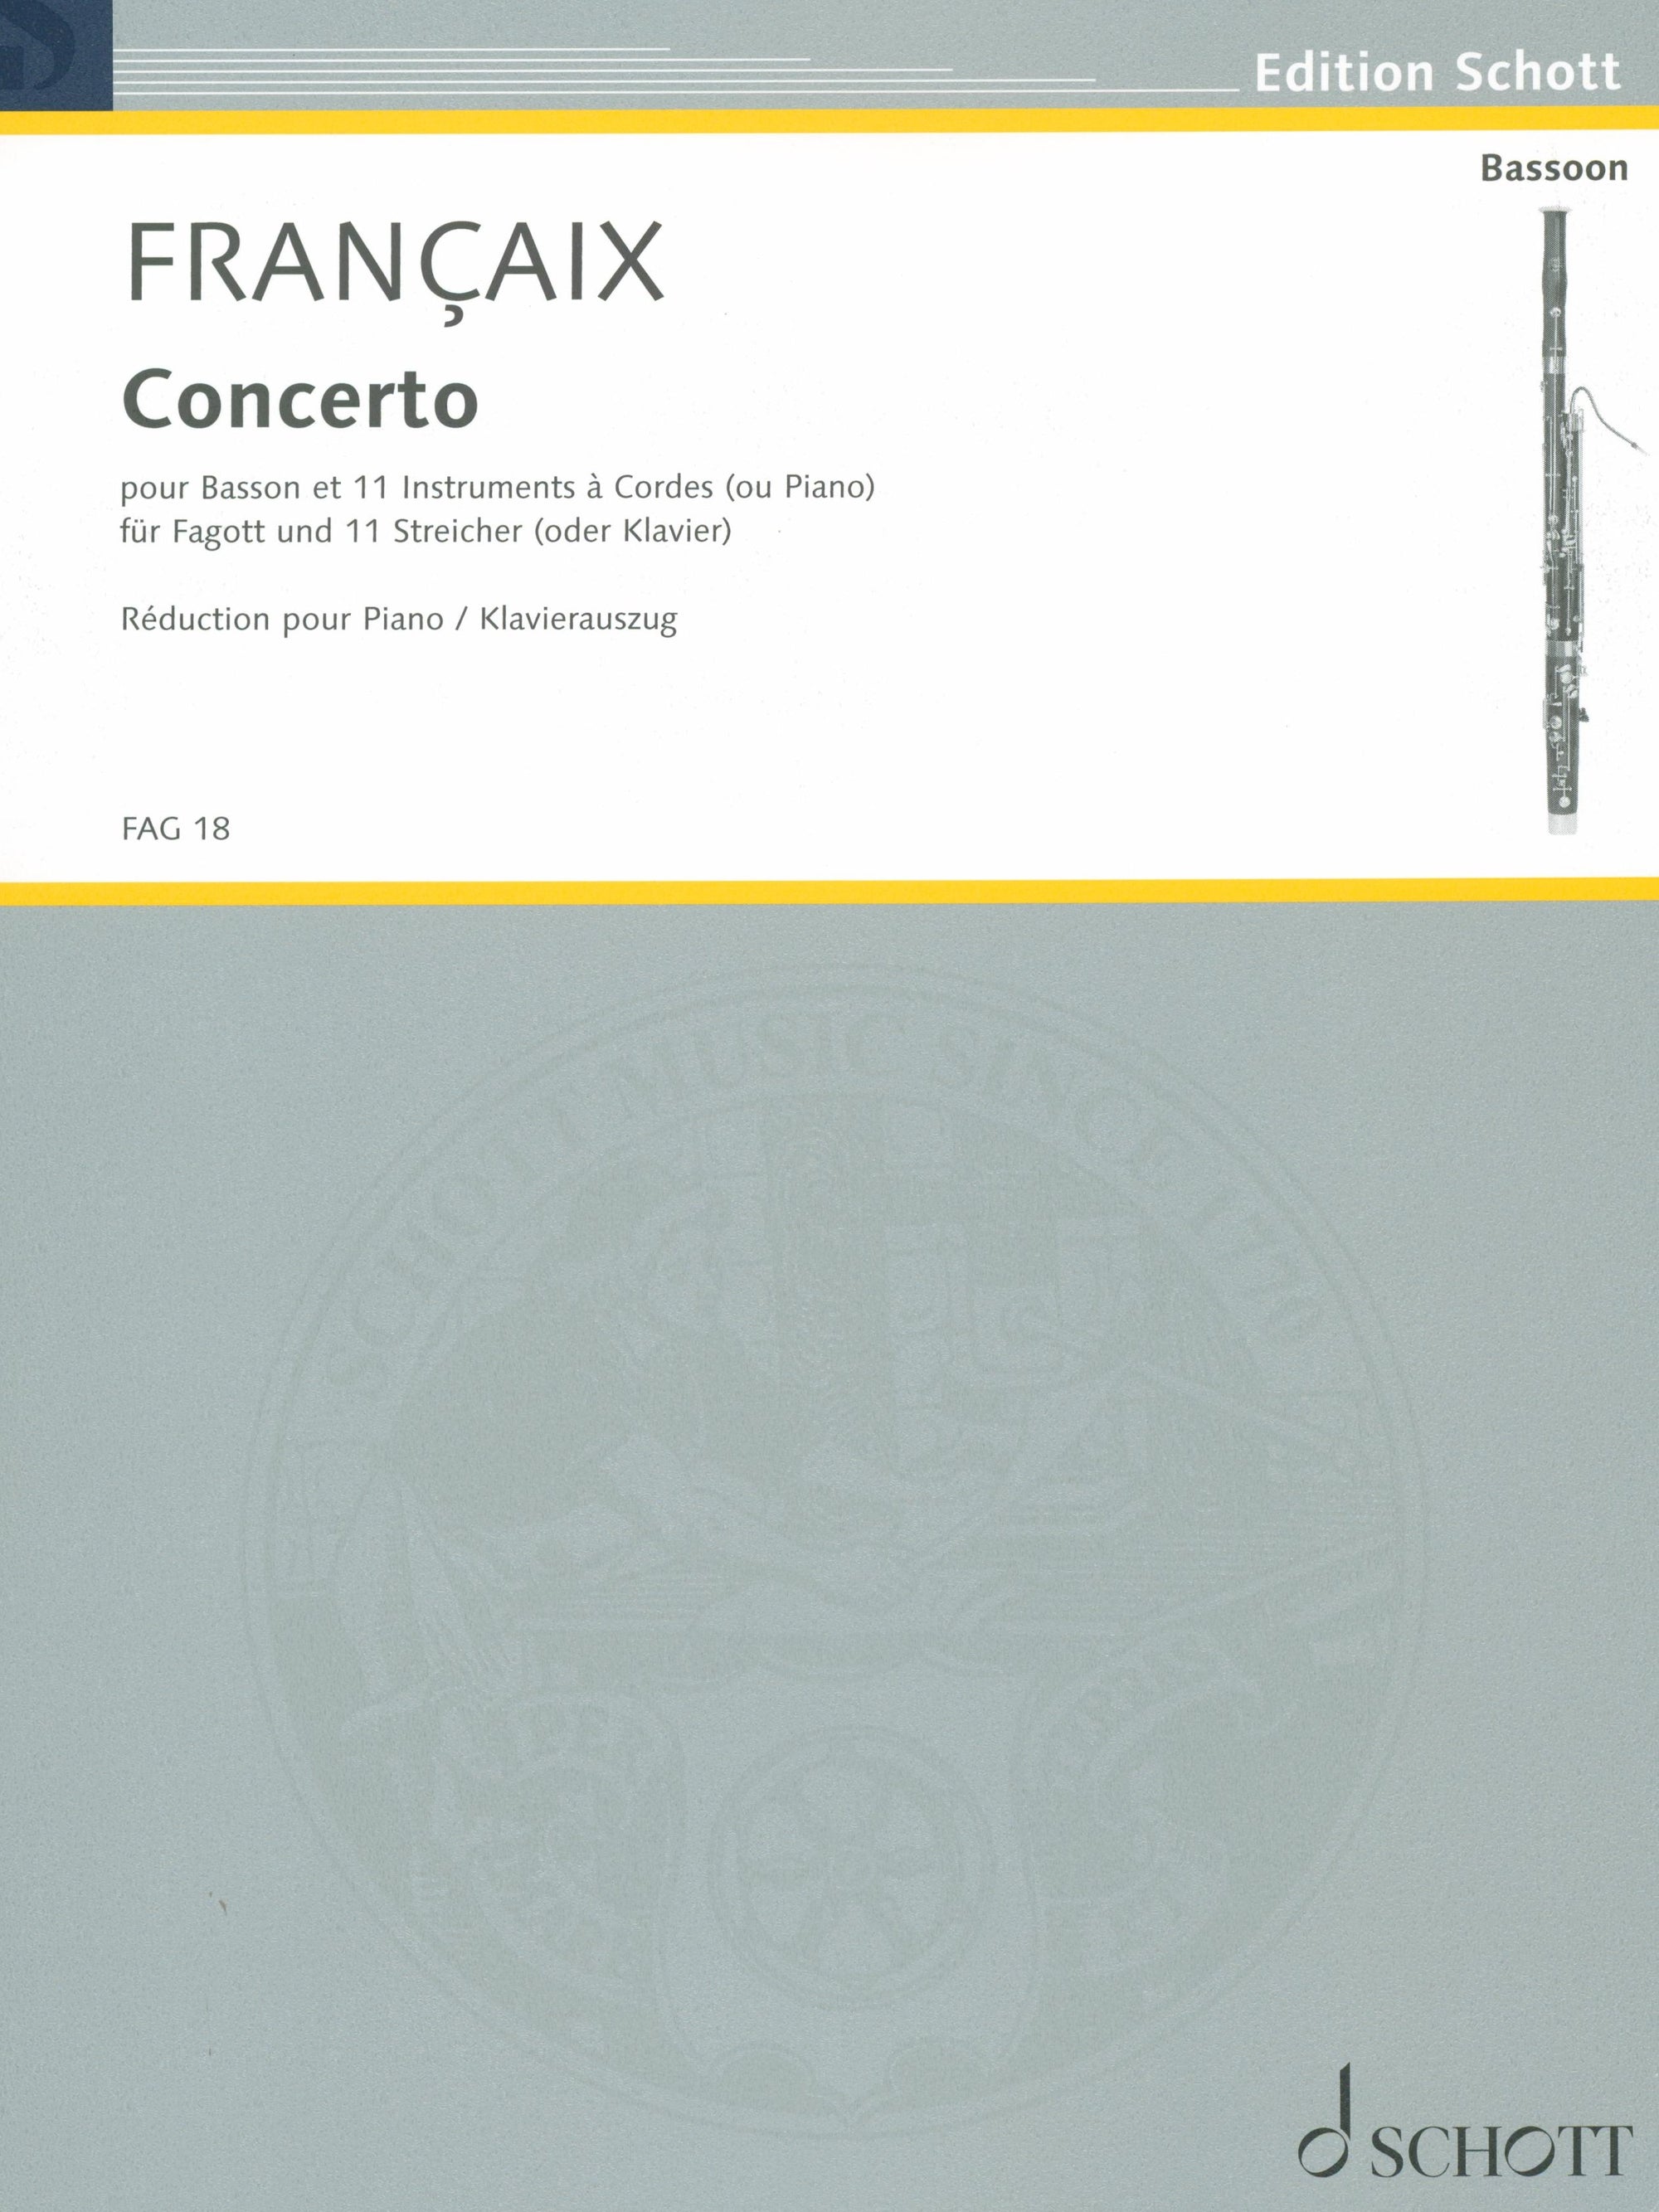 Françaix: Concerto for Bassoon and 11 Strings